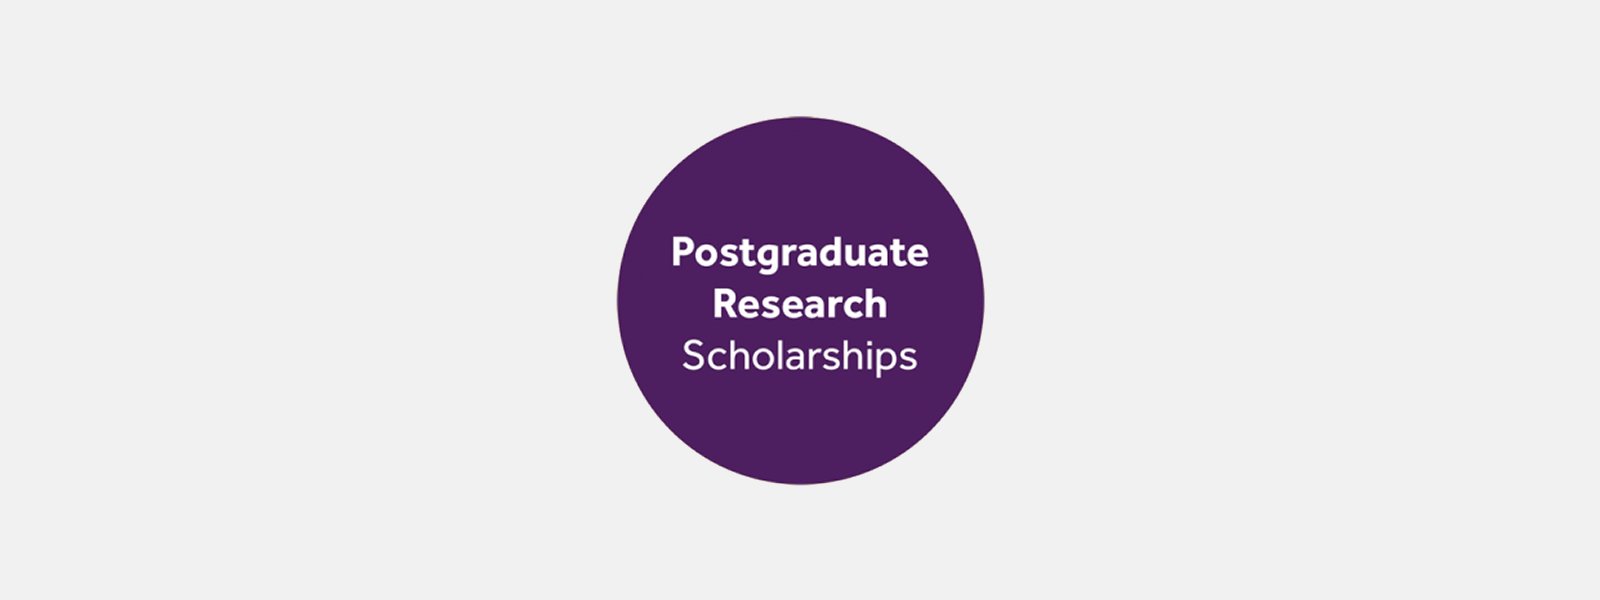 Postgraduate research scholarships for 2017